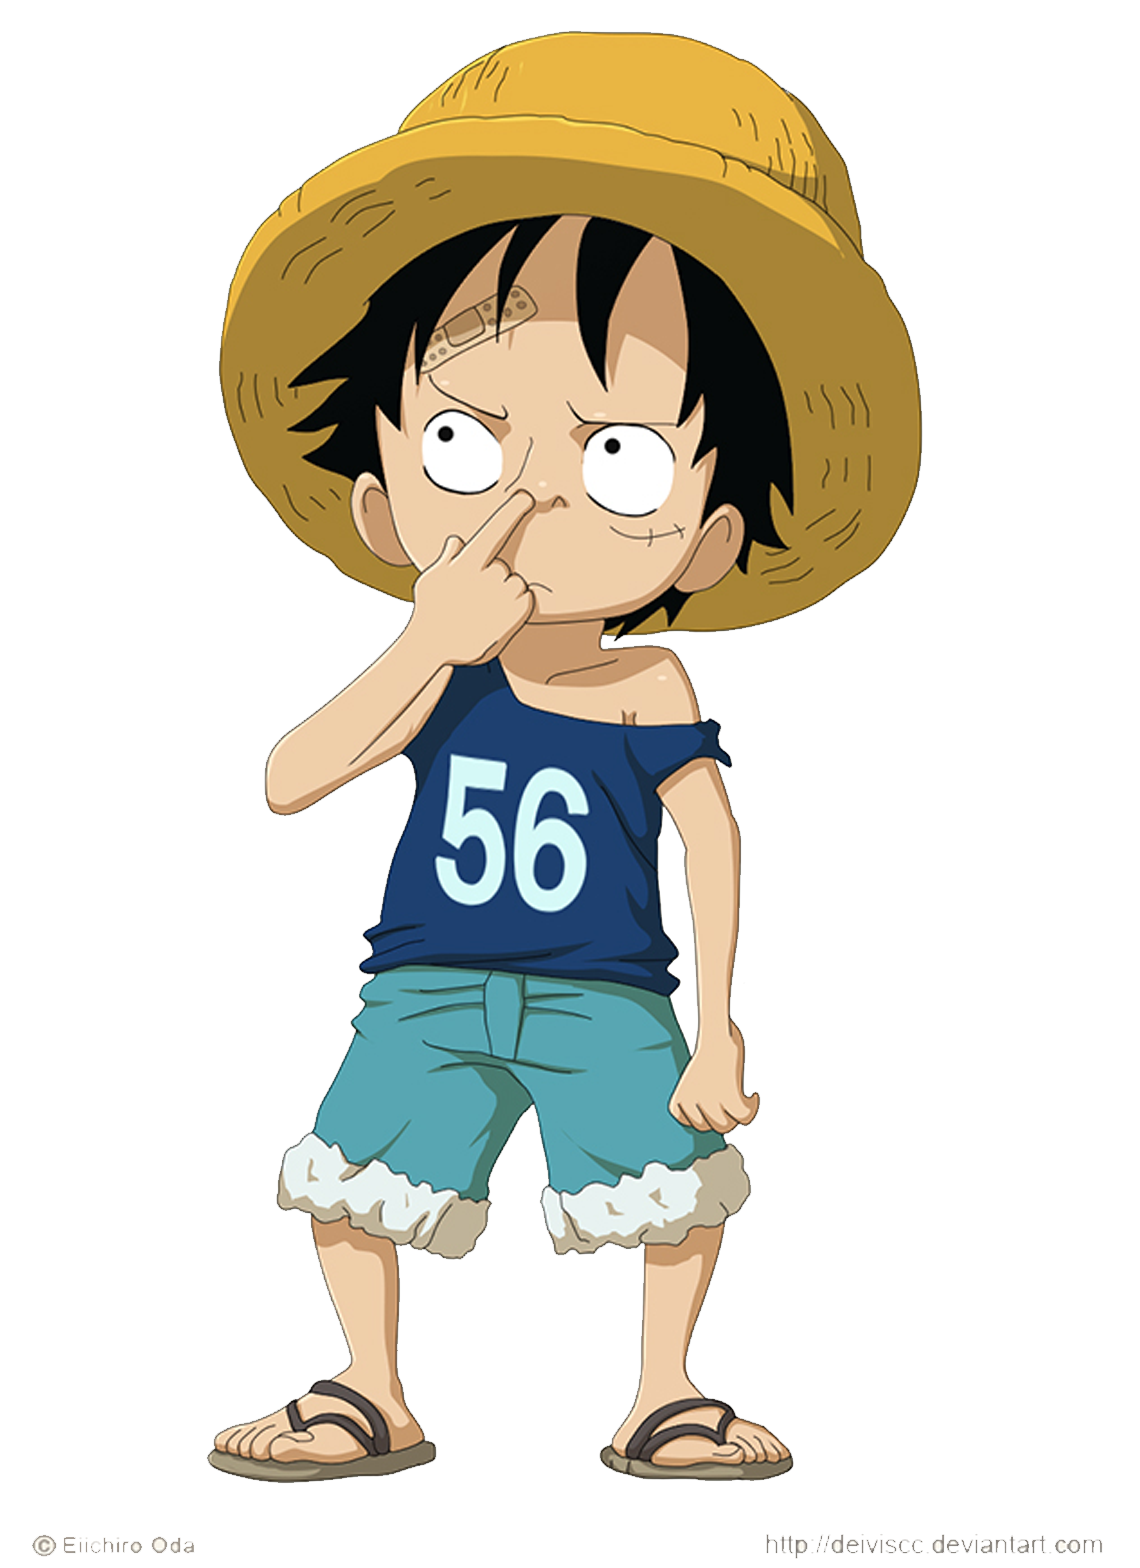 Luffy Kids Wallpapers Top Free Luffy Kids Backgrounds Wallpaper Access ...